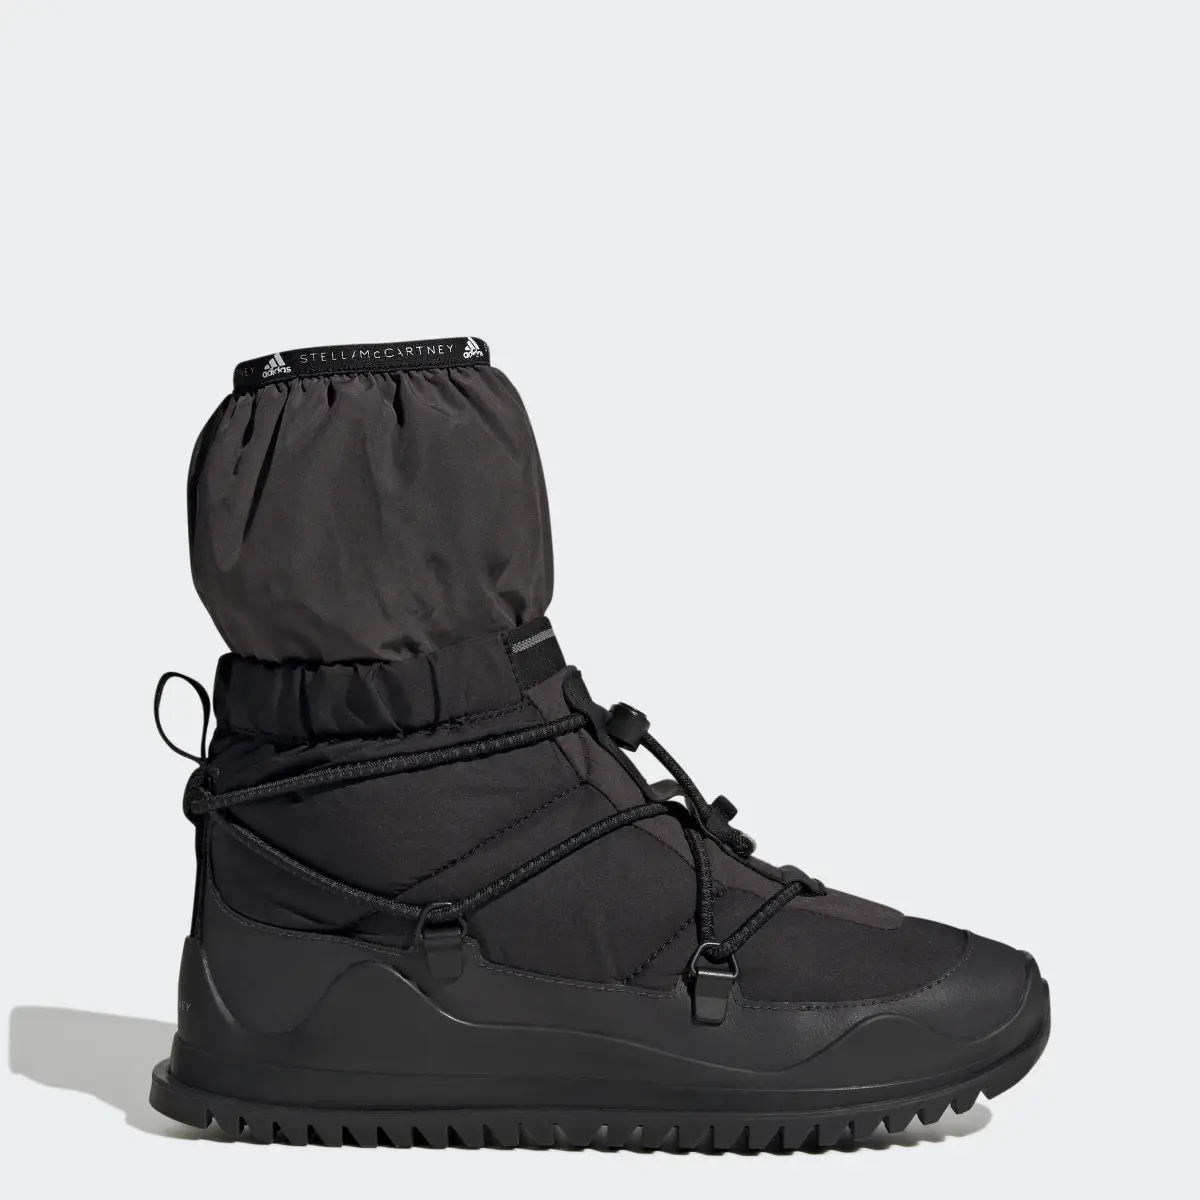 Adidas Botte d'hiver COLD.RDY adidas by Stella McCartney. 1